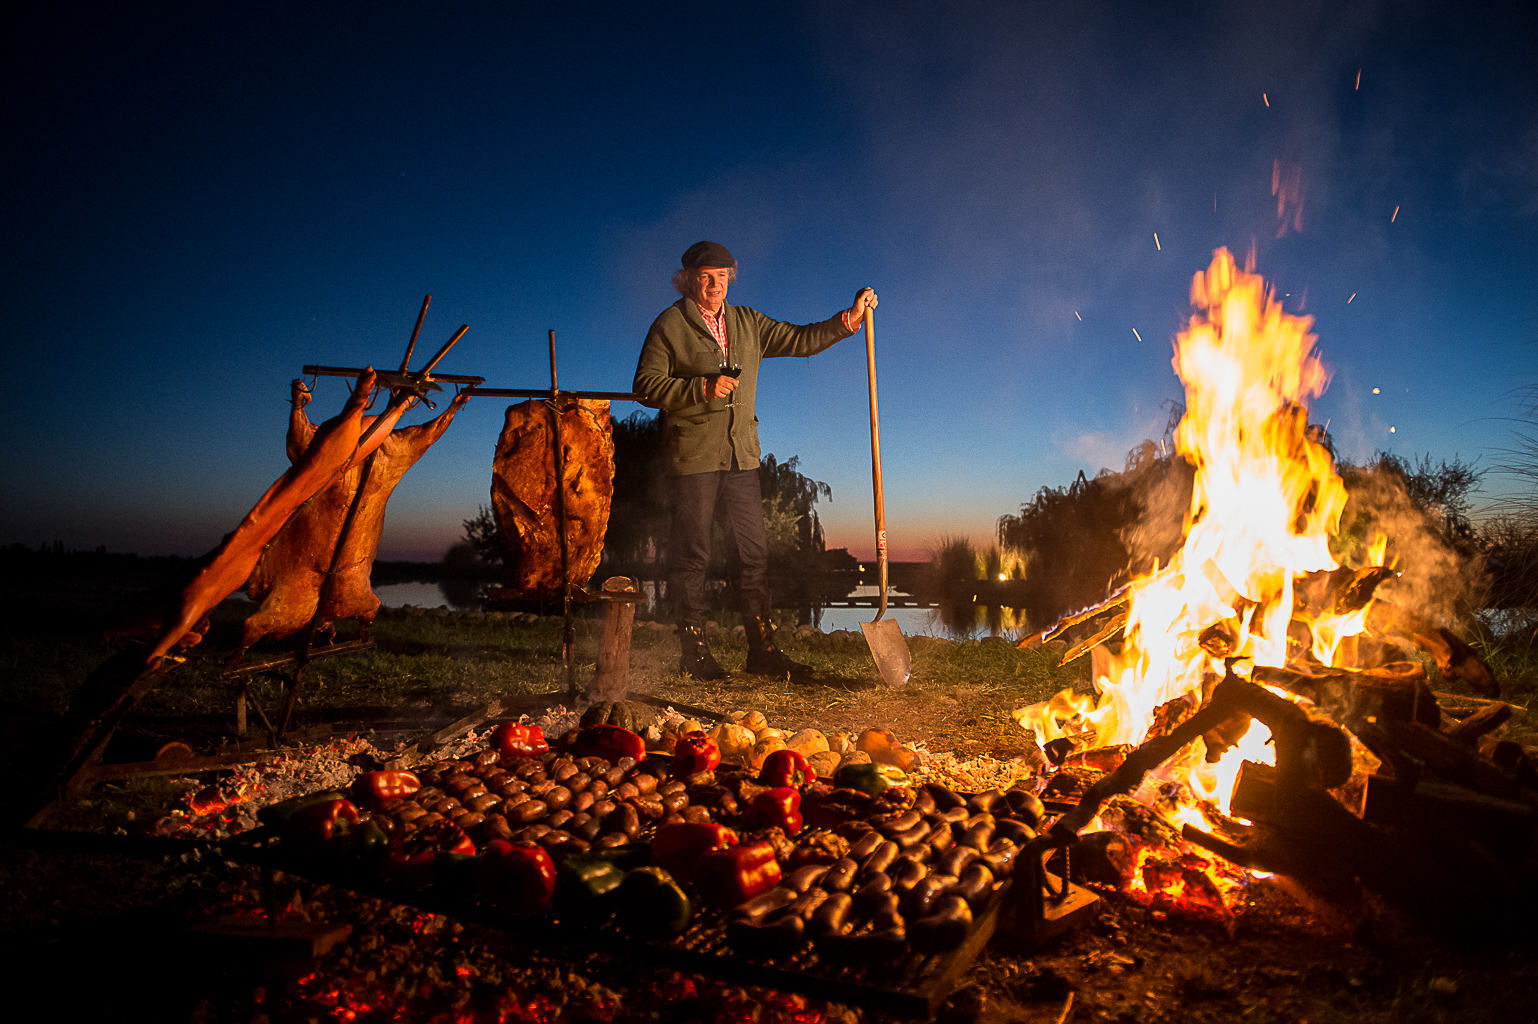 Image of chef mallman with open fire